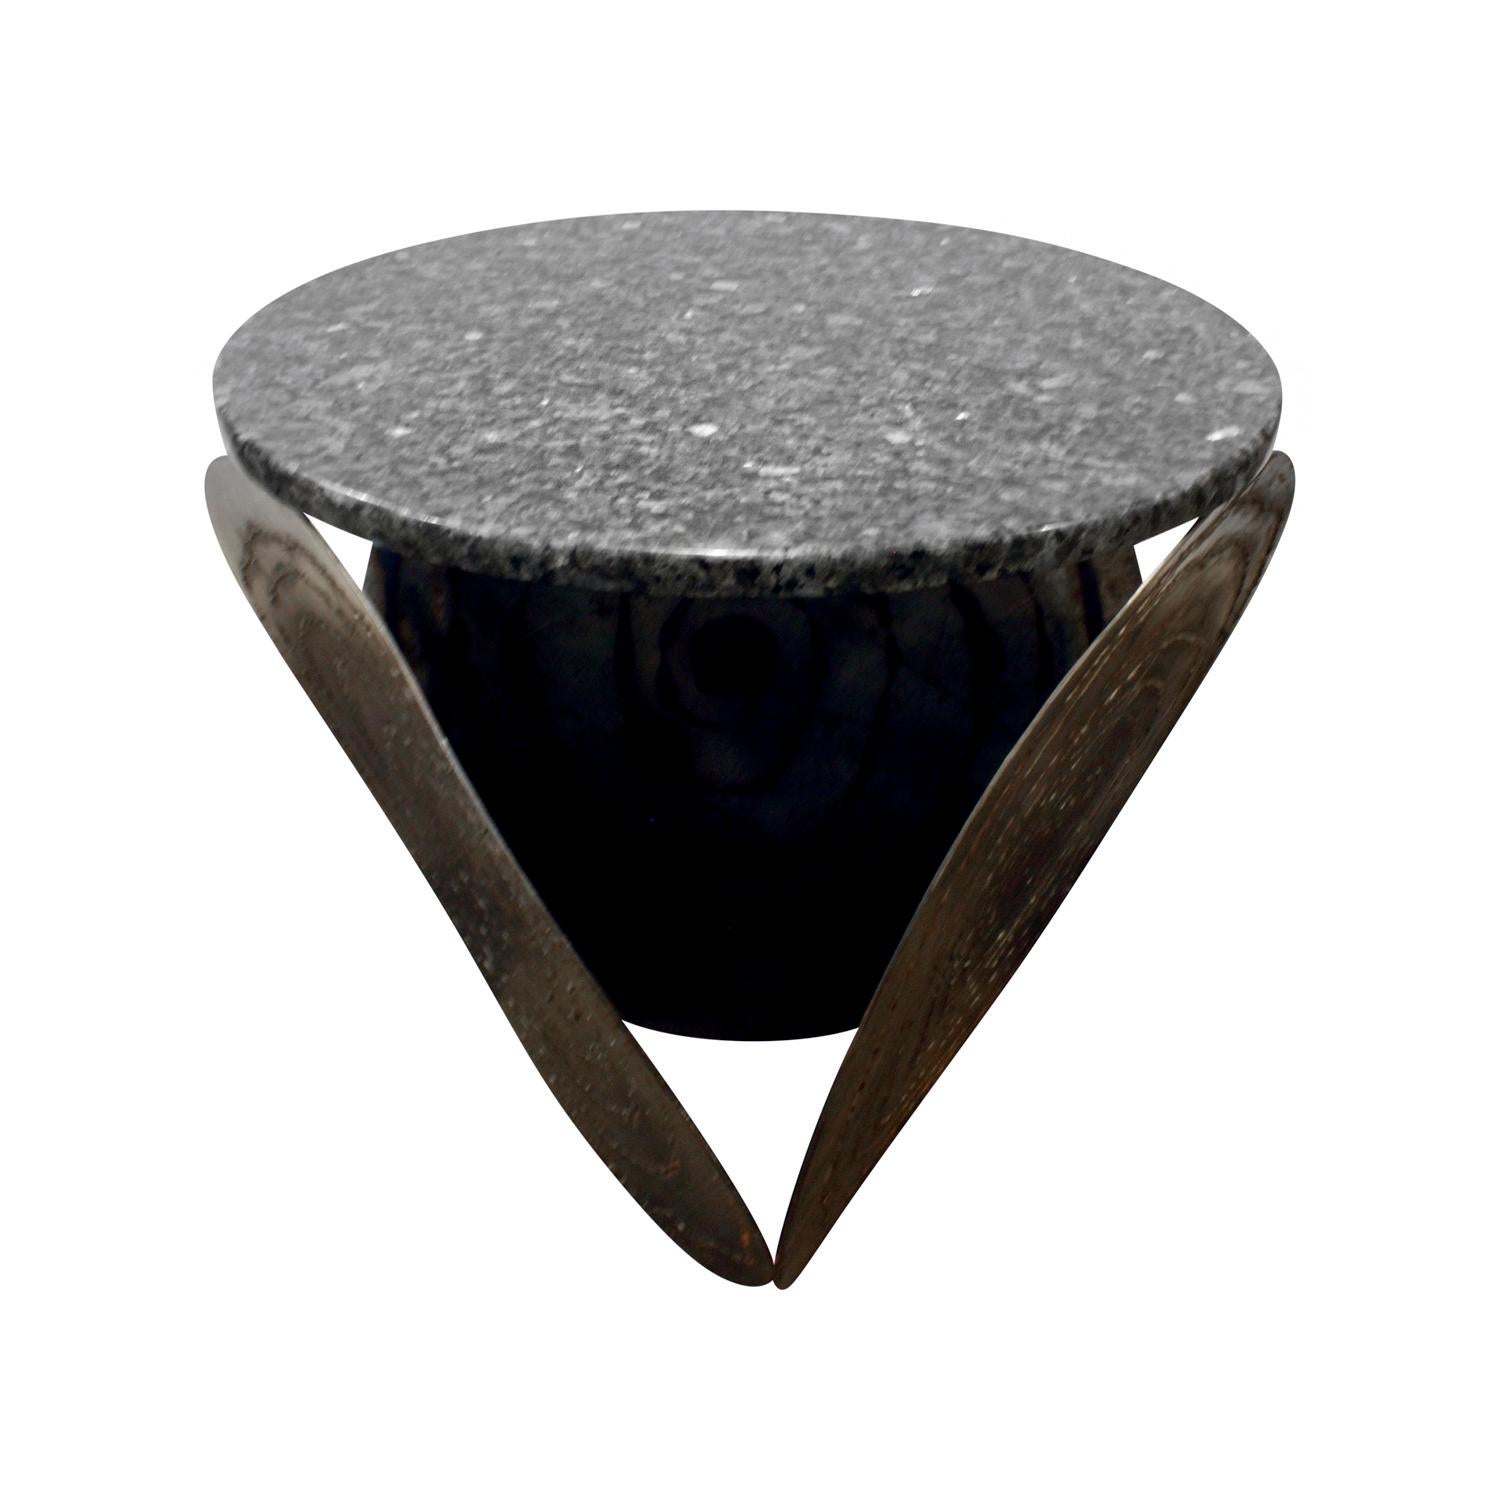 Artisan brutalist side table with welded steel disc design and granite top, American, 1970s.